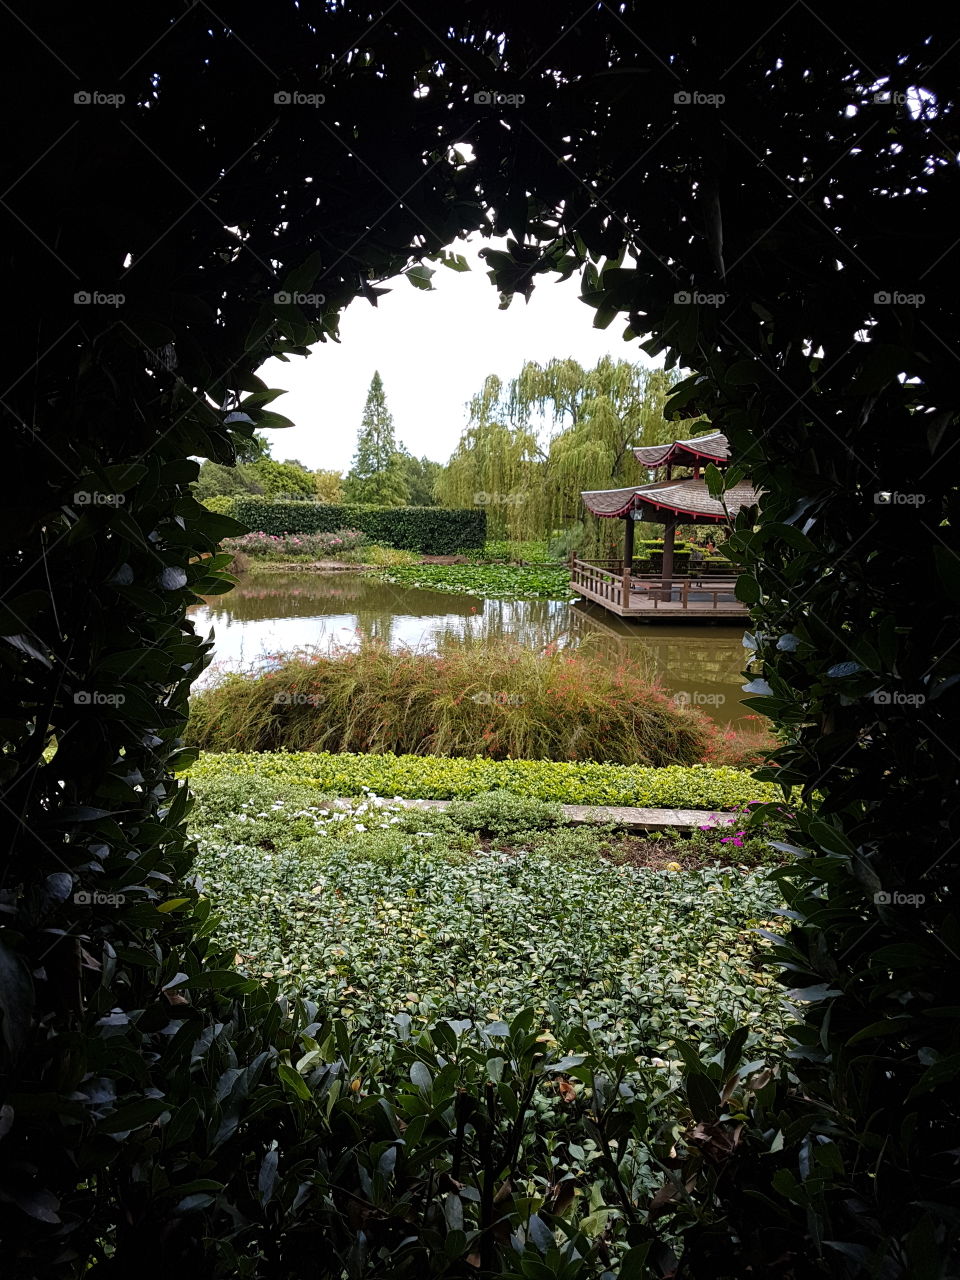 a peek through the henges too a beautiful and tranquil Japanese style garden.